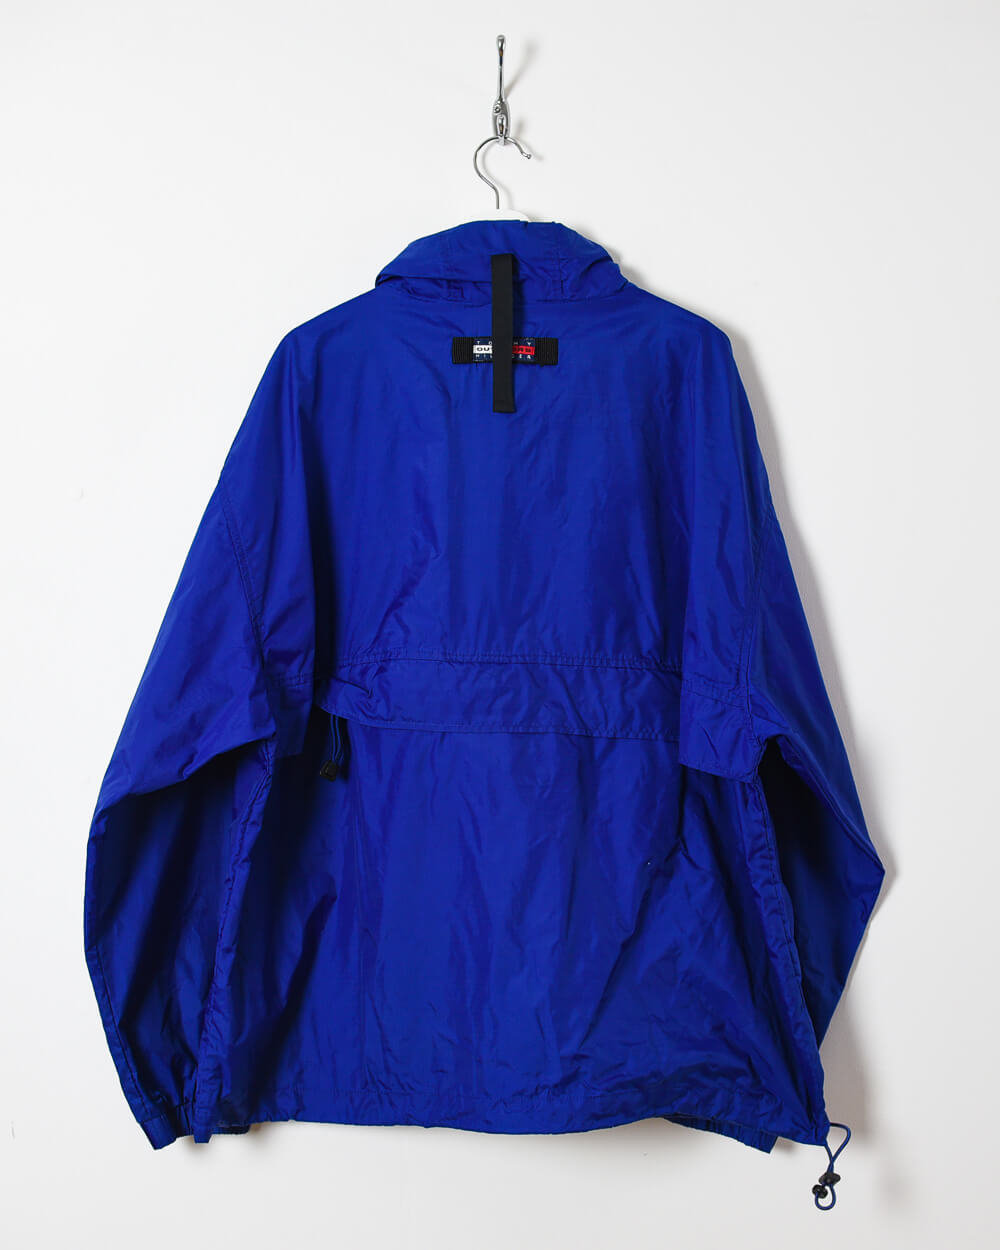 Tommy Hilfiger Outdoor Windbreaker Jacket - X-Large - Domno Vintage 90s, 80s, 00s Retro and Vintage Clothing 